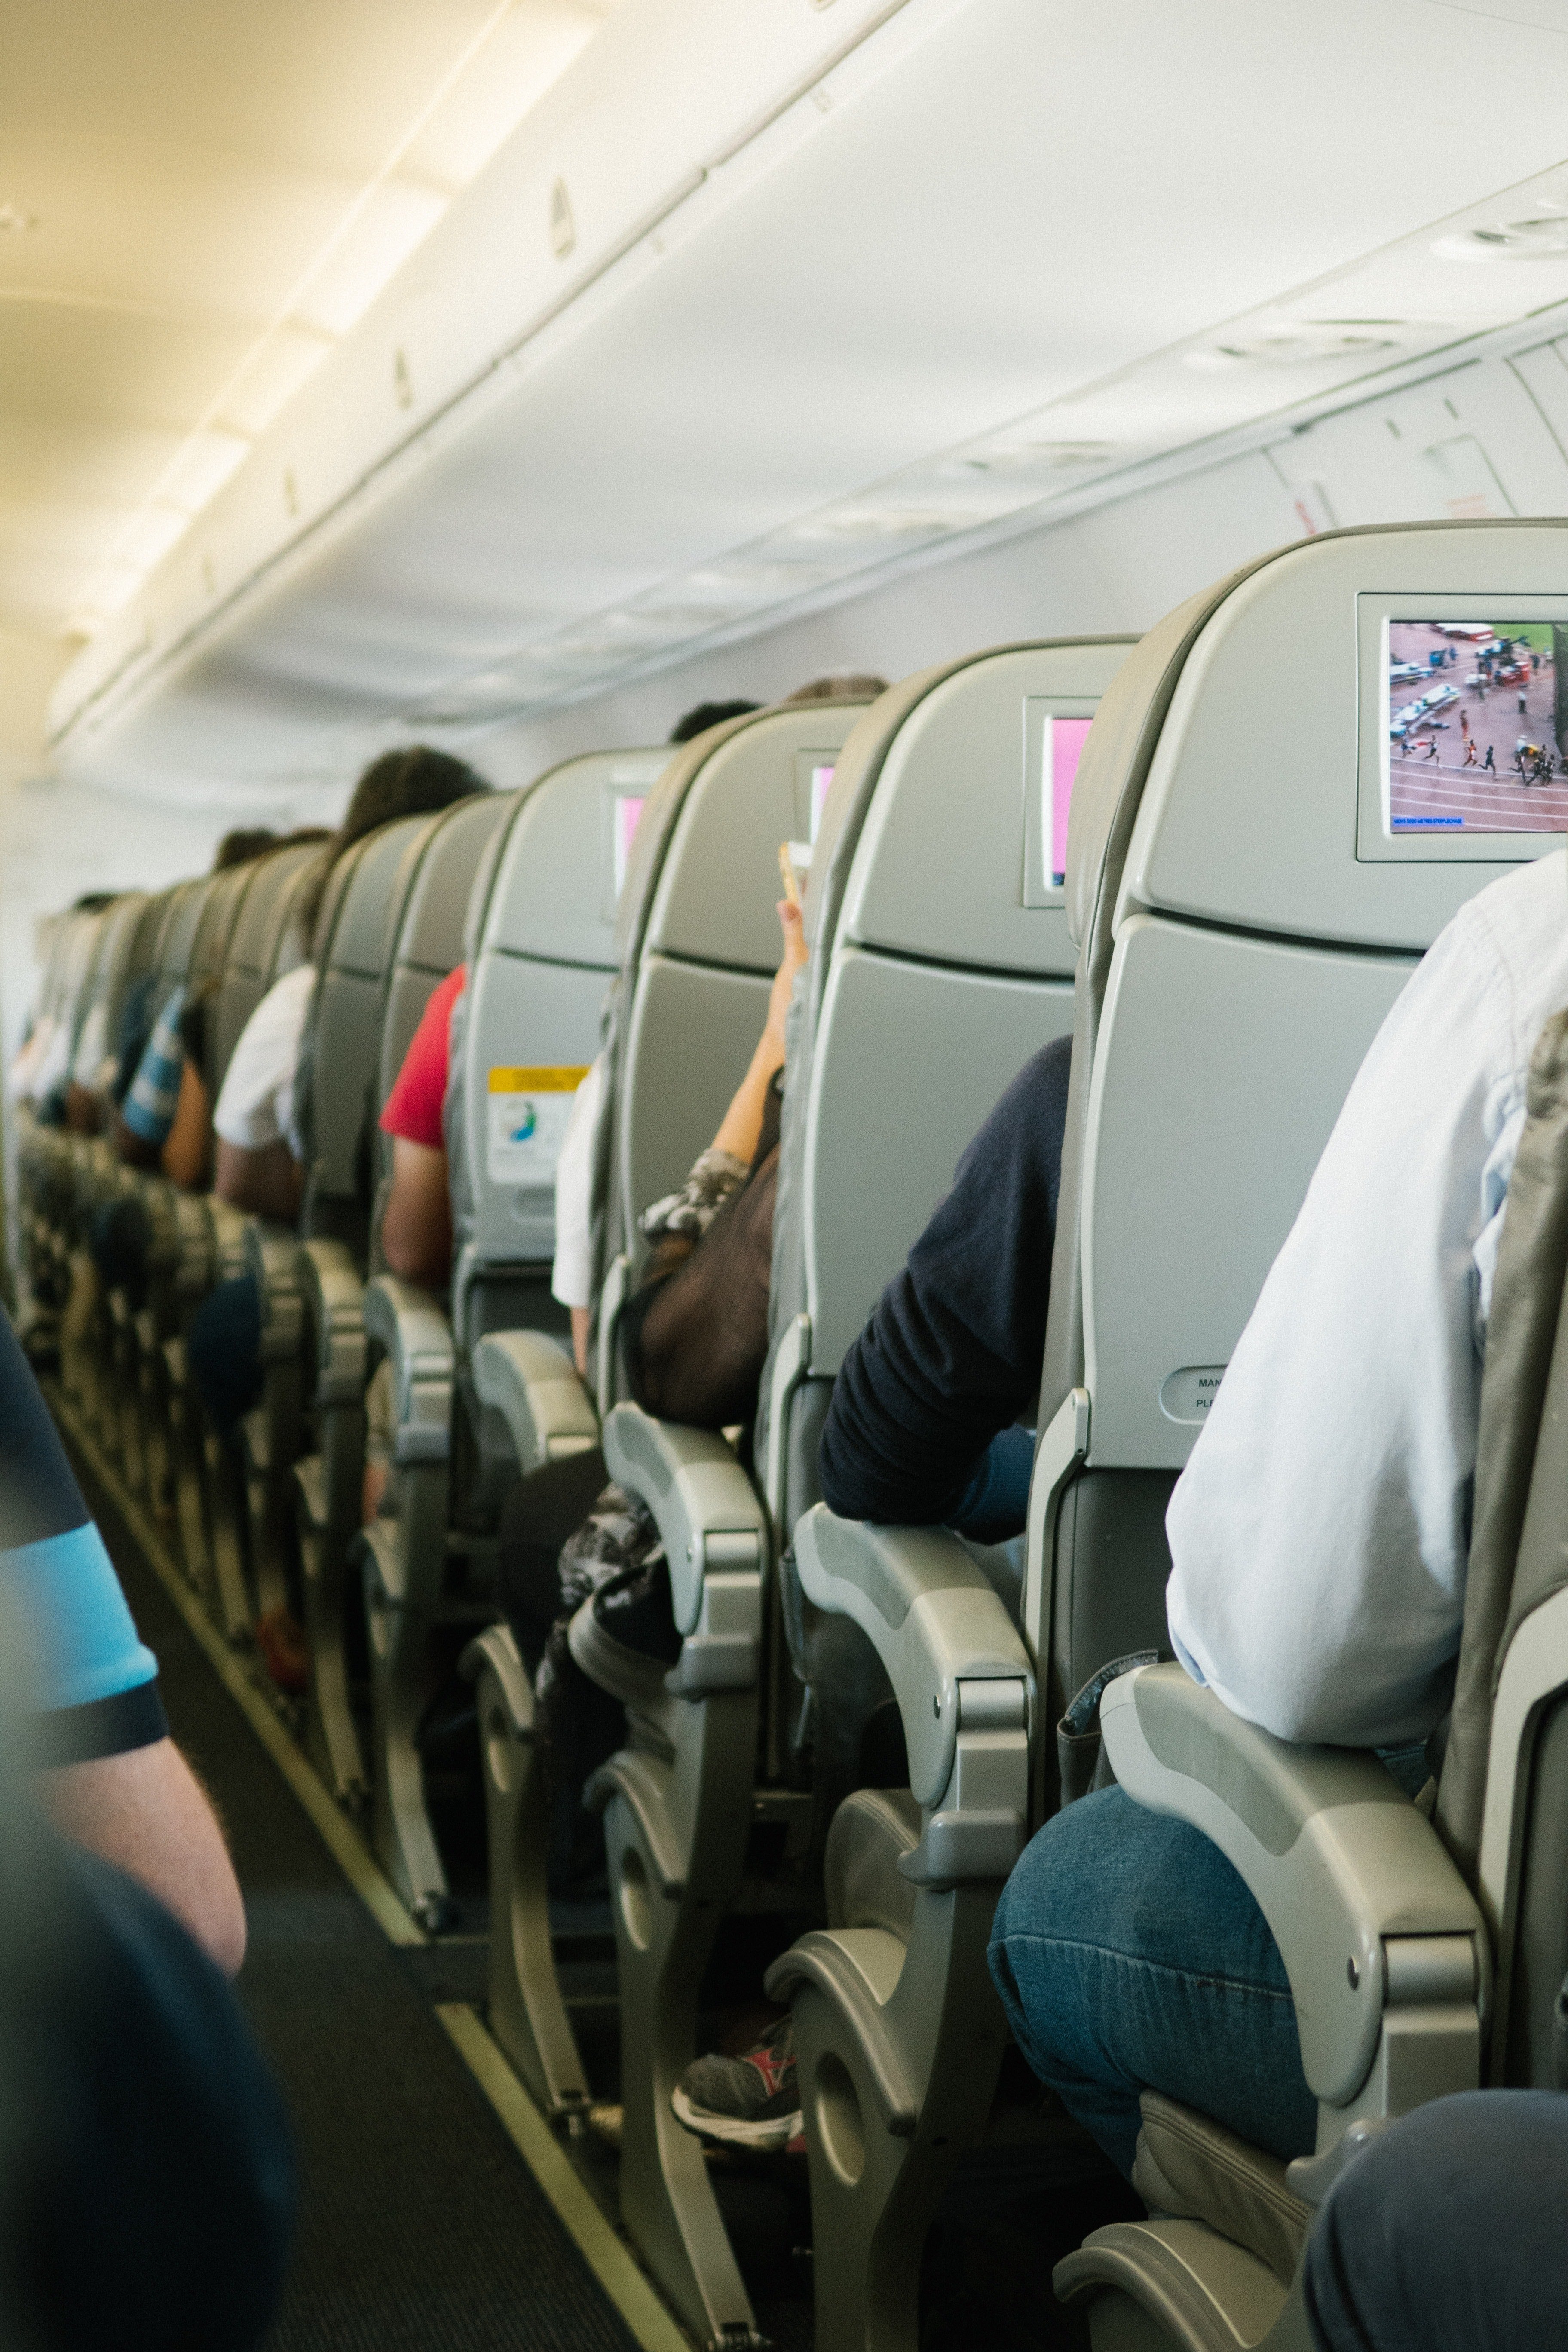 Many passengers are downright with their refusal | Photo: Pexels/athena